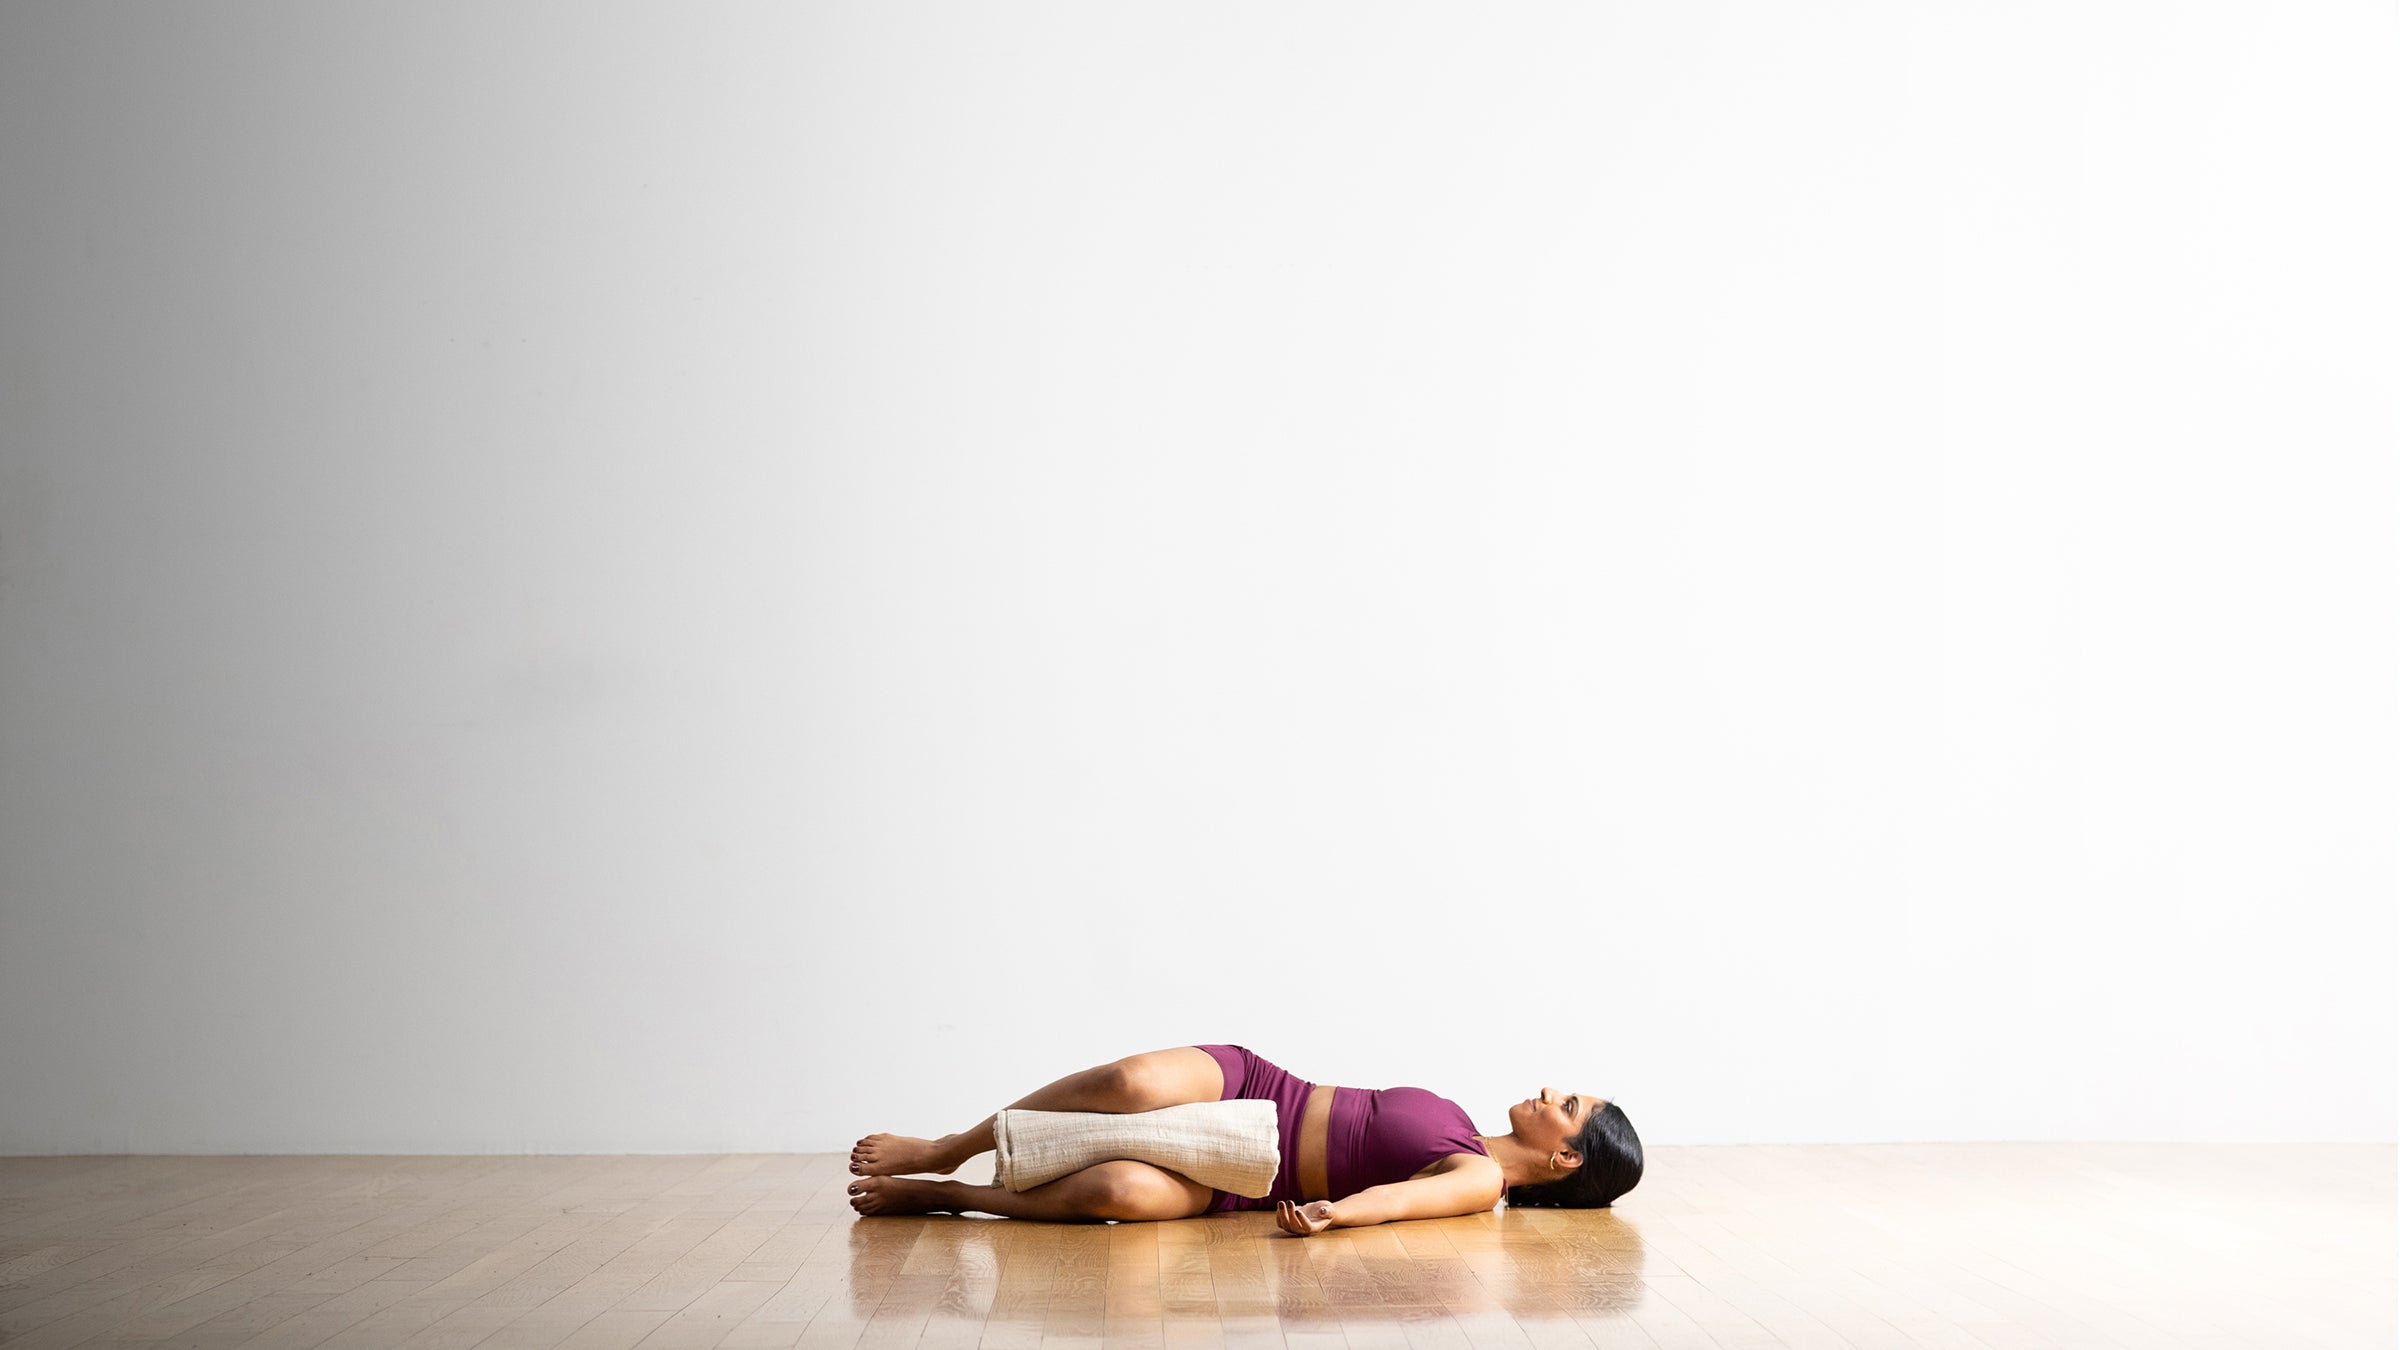 Soothing Period Cramps with Yoga | Be Me Blog – B E M E W O M A N